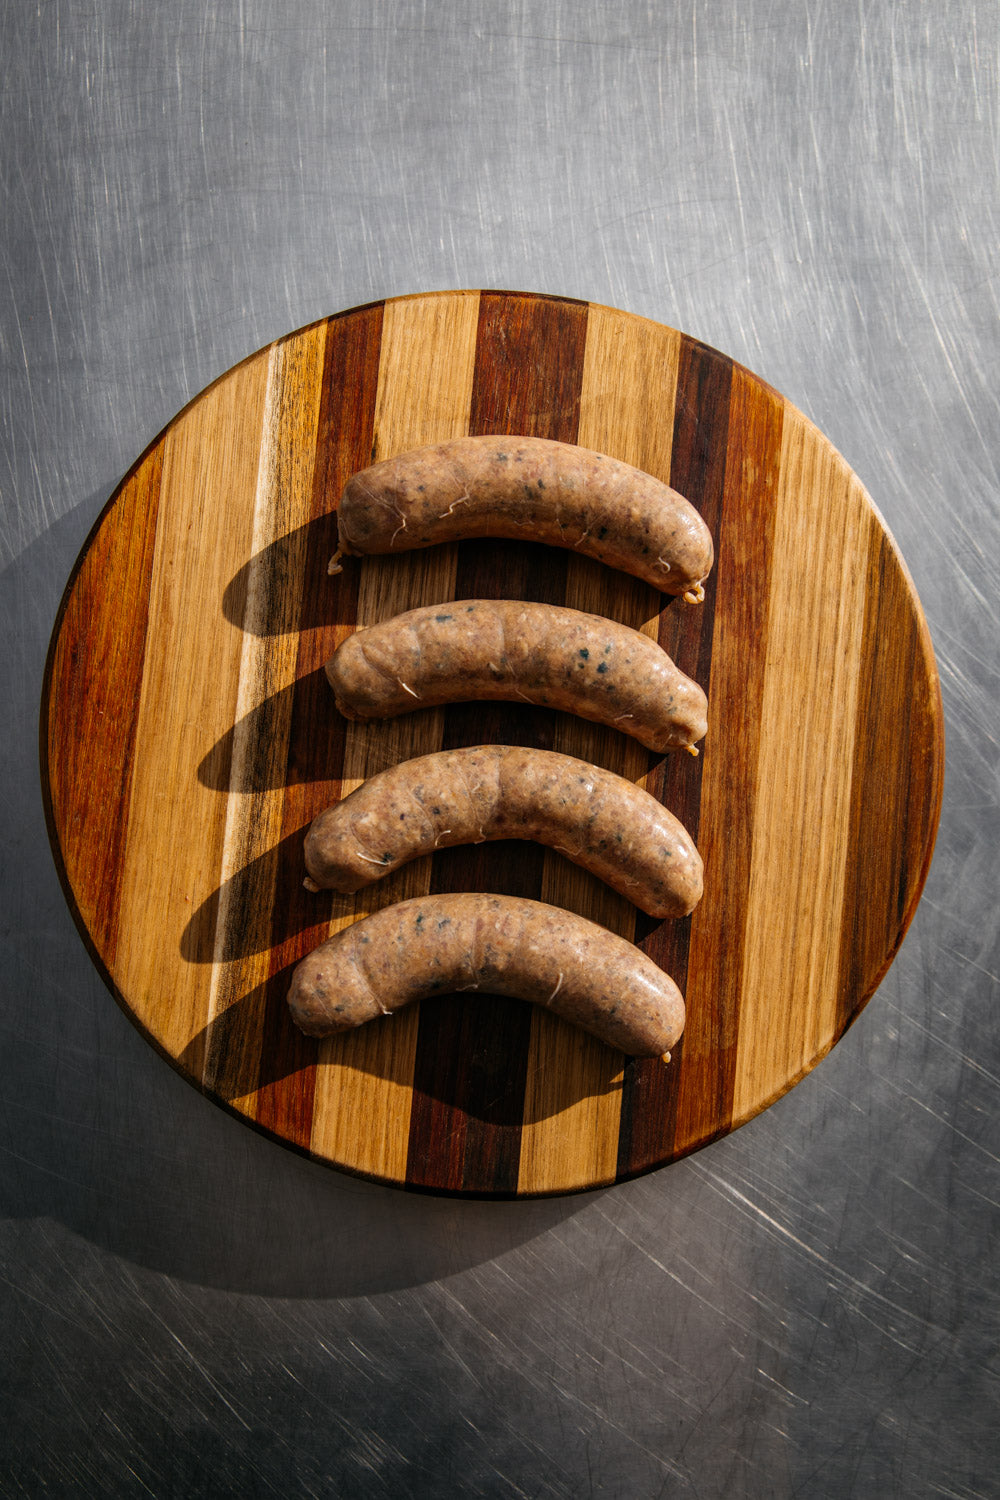 Italian Sausage (package of 5)